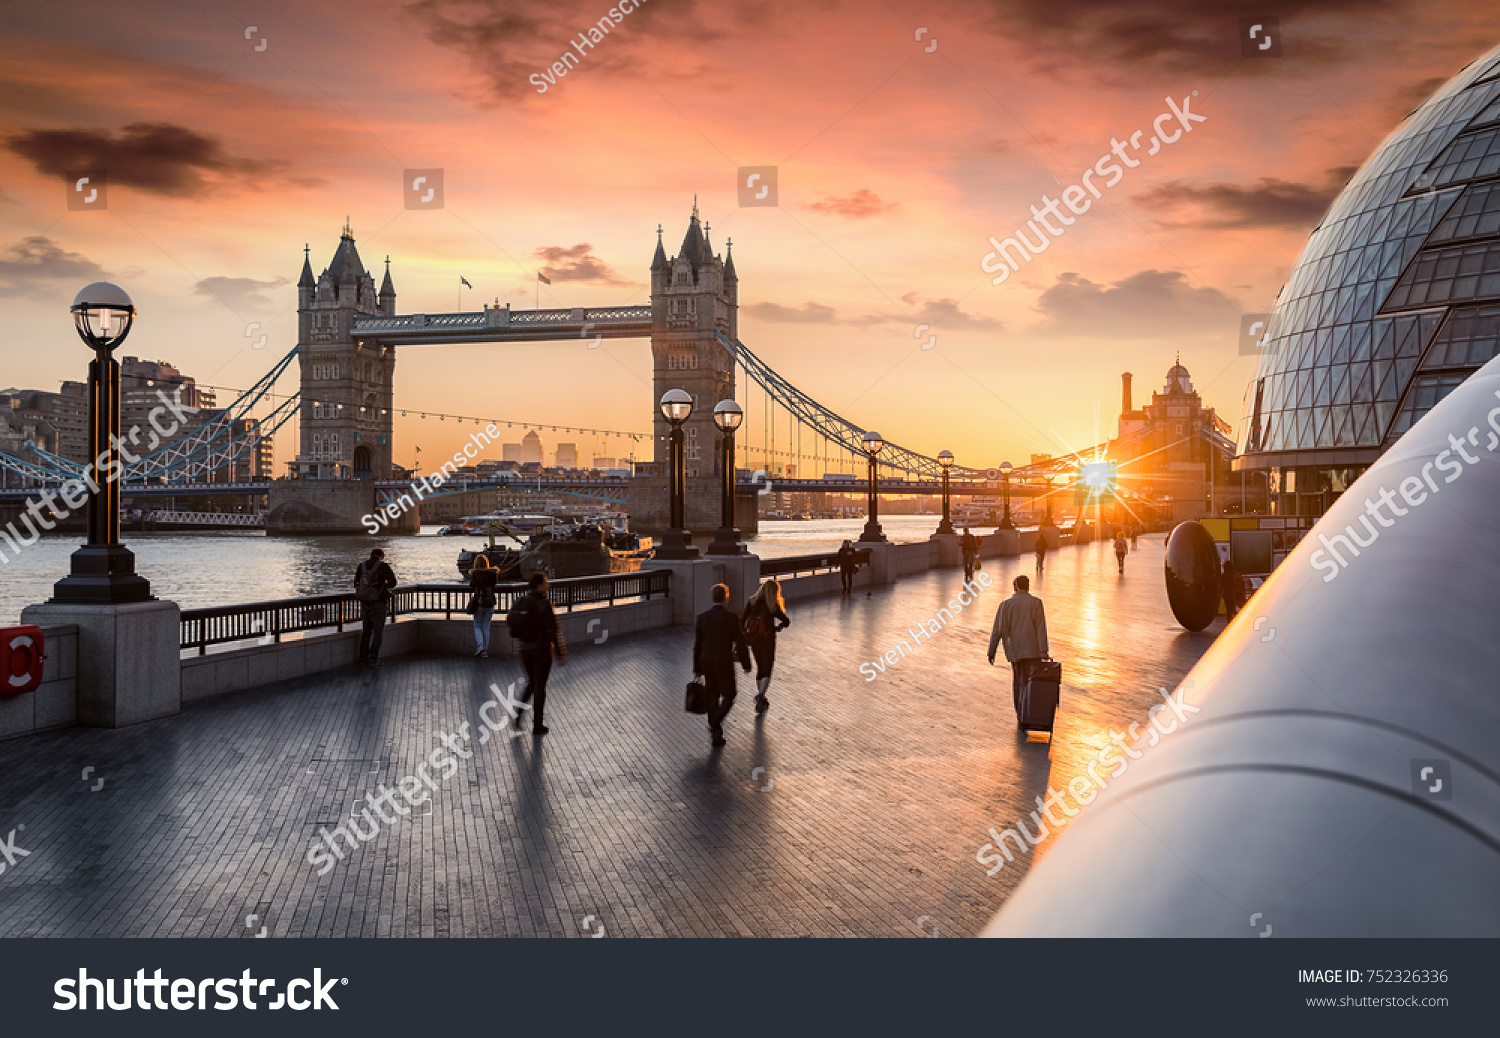 The Tower Bridge in London during sunrise and people rushing to their work #752326336